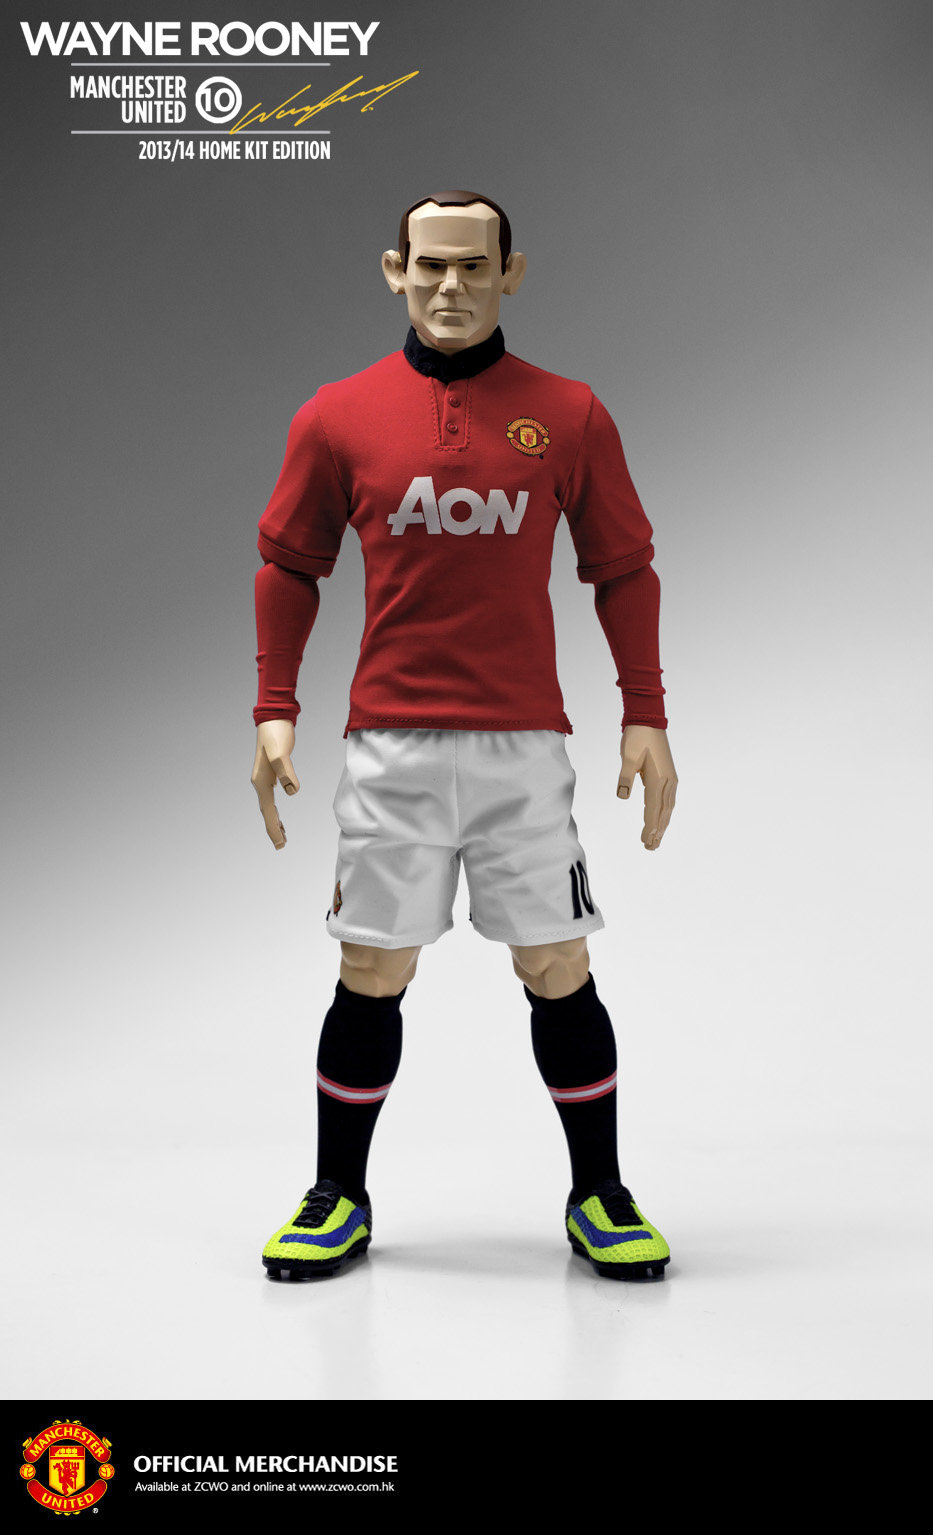 IMINIME/ZC WORLD - MANCHESTER UNITED - Page 3 2z6n